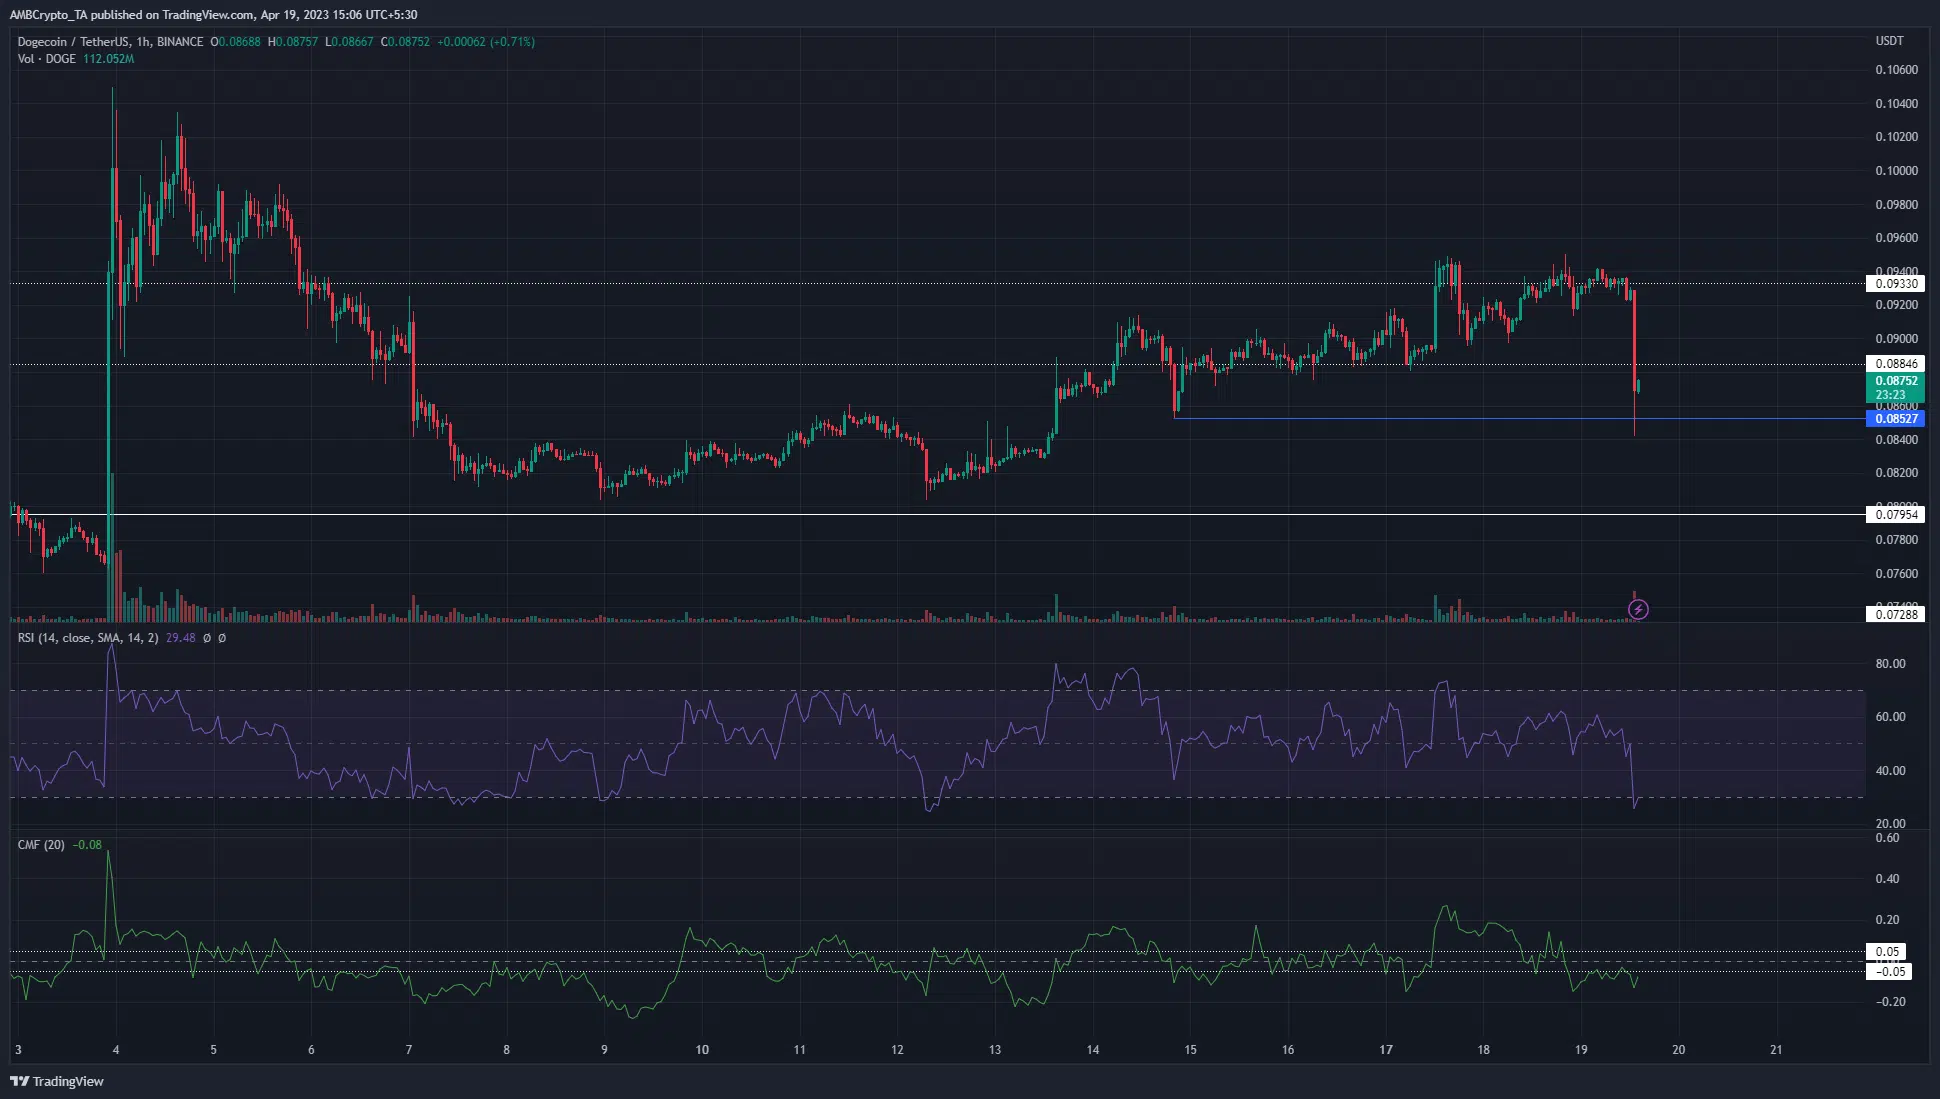 Dogecoin sees an ugly rejection at resistance, are the bears back?